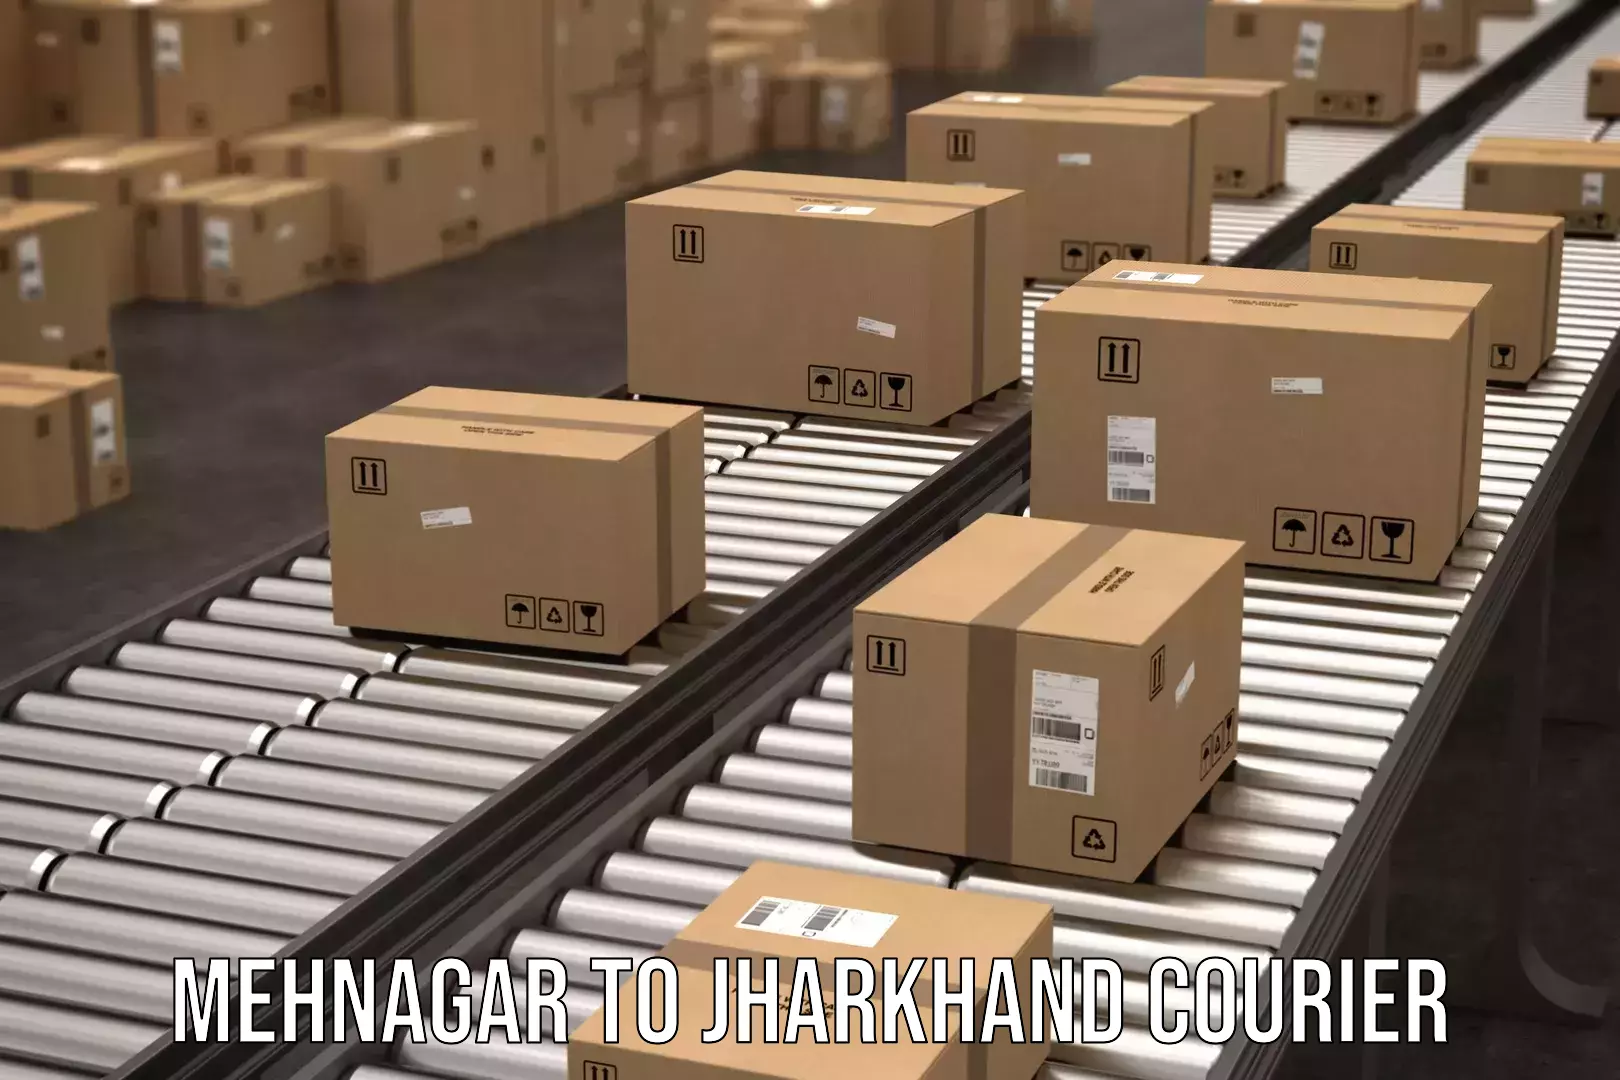 Online package tracking Mehnagar to Ranchi